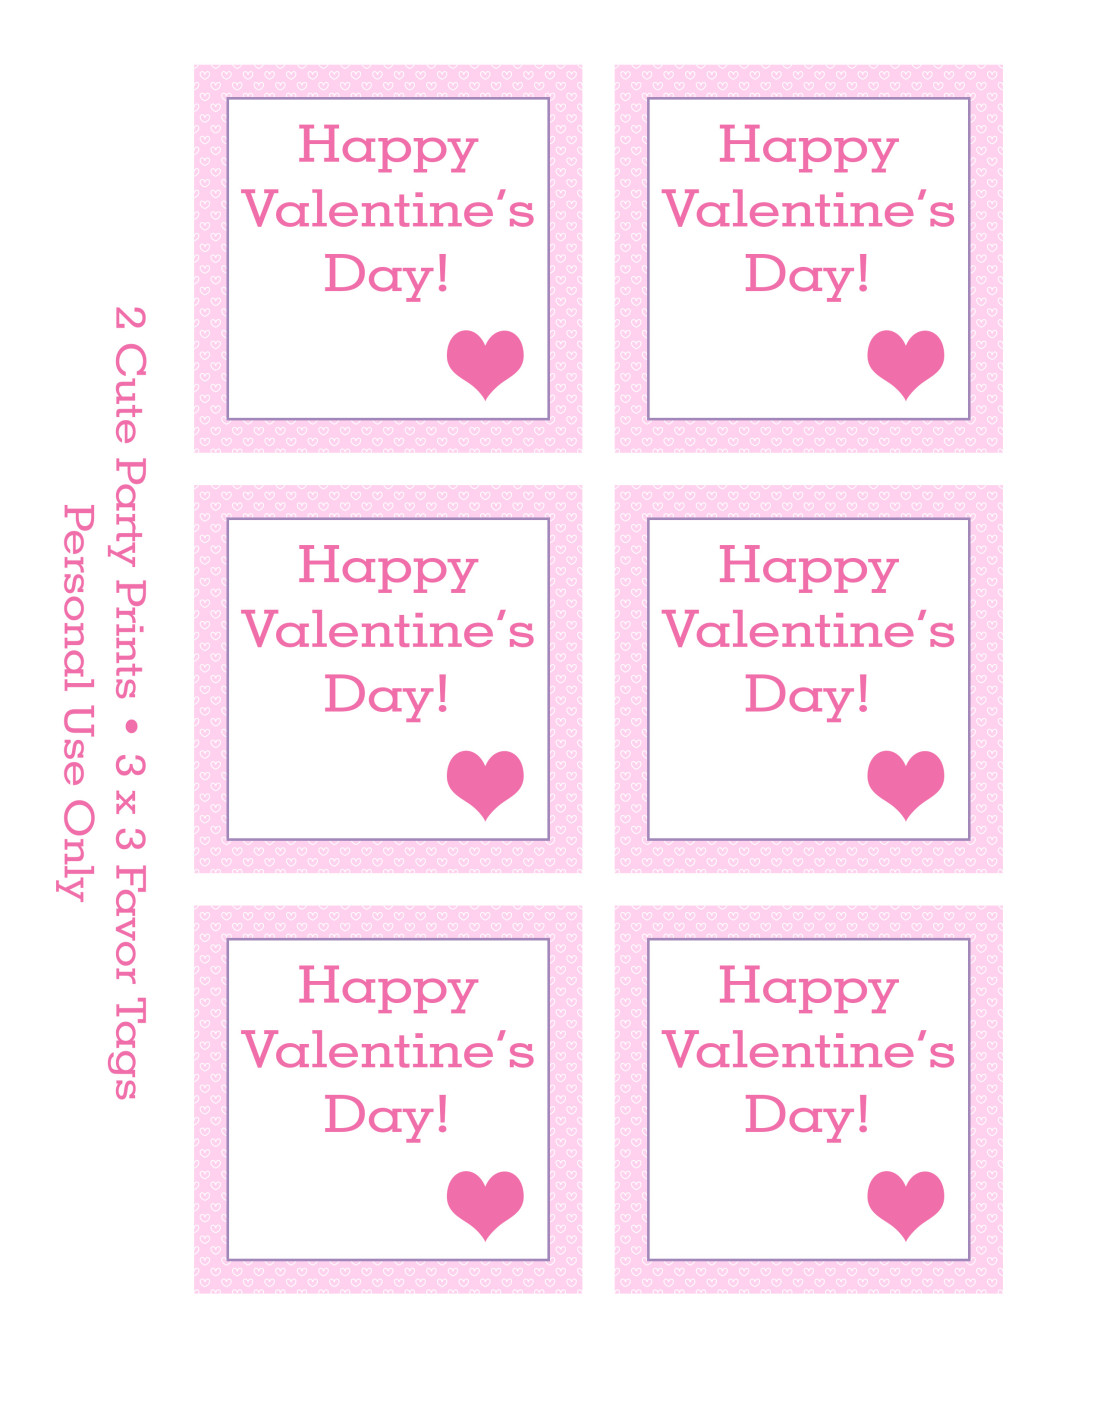 6 Best Images of Happy Valentine's Day Printable Tag Valentine's Day